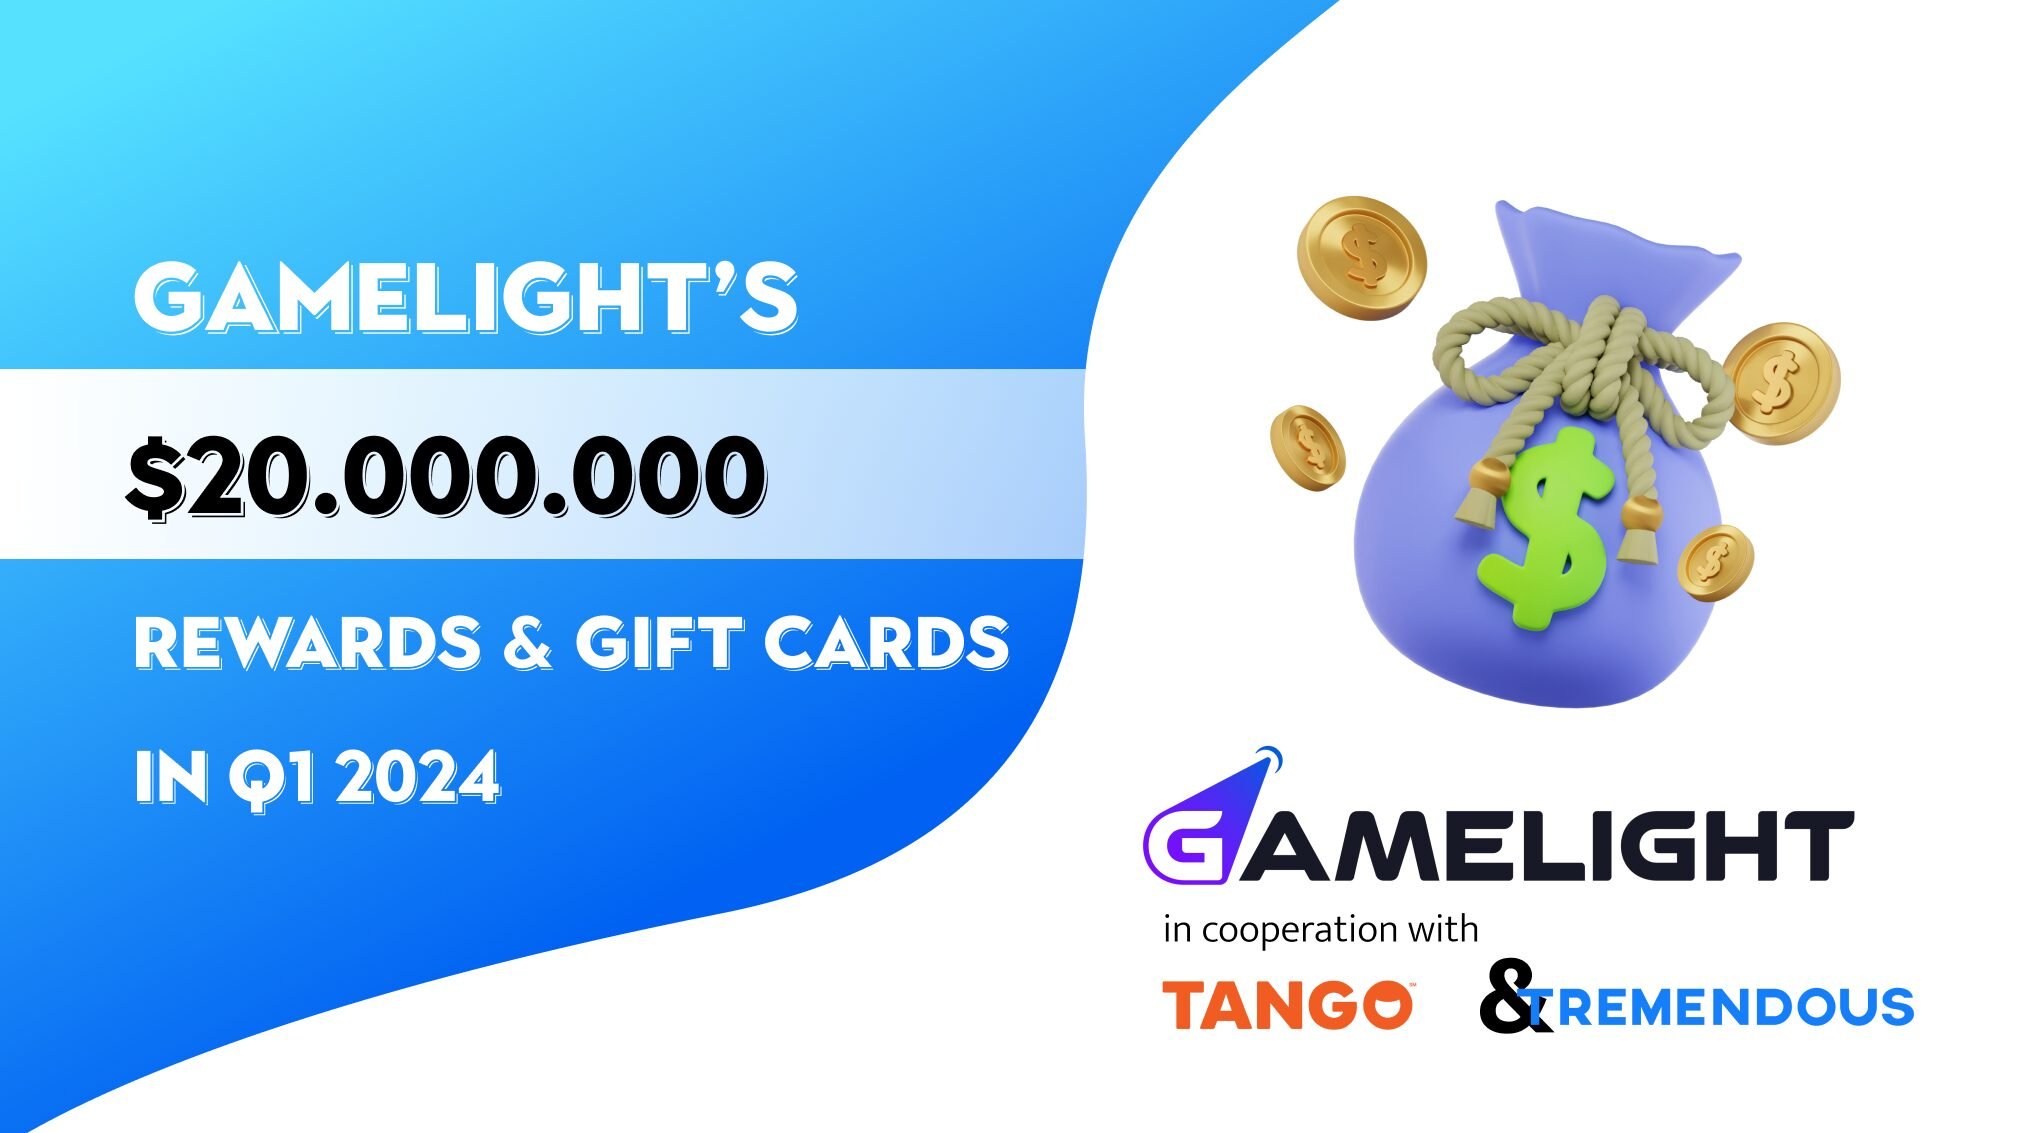 Gamelight Has Already Given $20 Million in Rewards to their Players in 2024 – Gamezebo